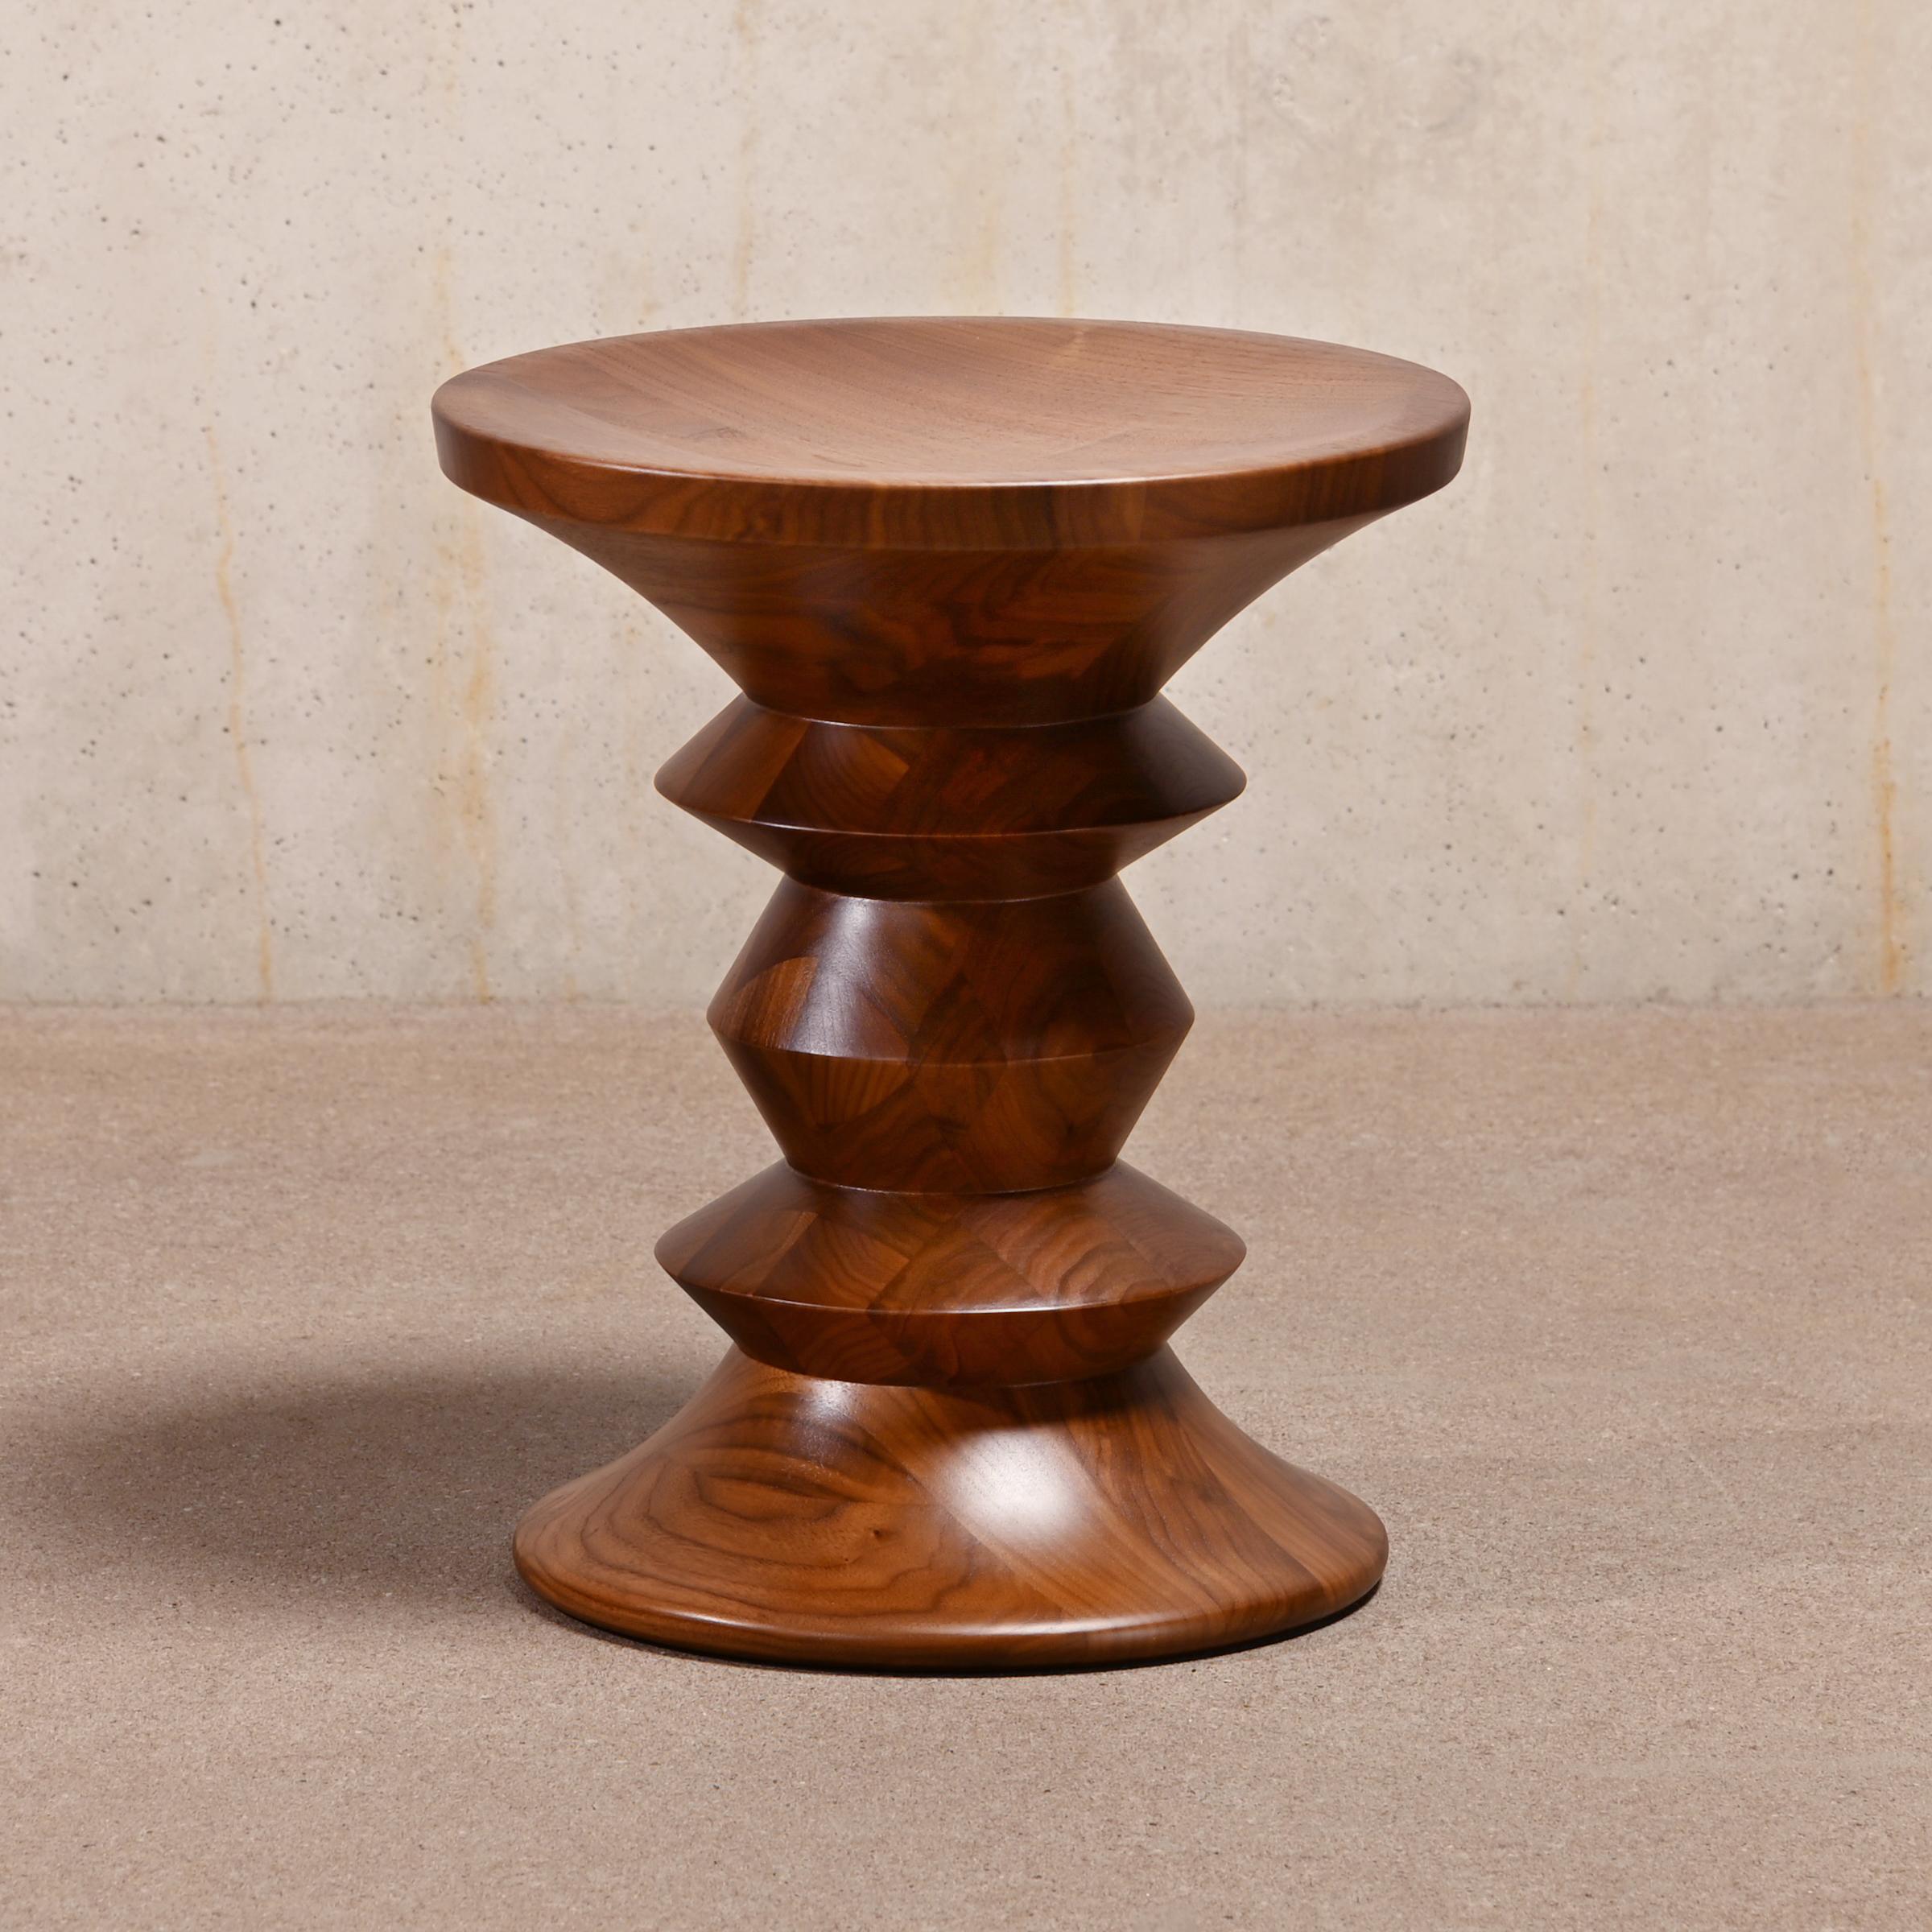 Beautiful solid walnut stool (Model A). One of the many design icons by Charles and Ray Eames and originally designed for three lobbies at New York's Rockefeller Center in 1960. The Stool is a charming addition to many lounge chairs and sofas and